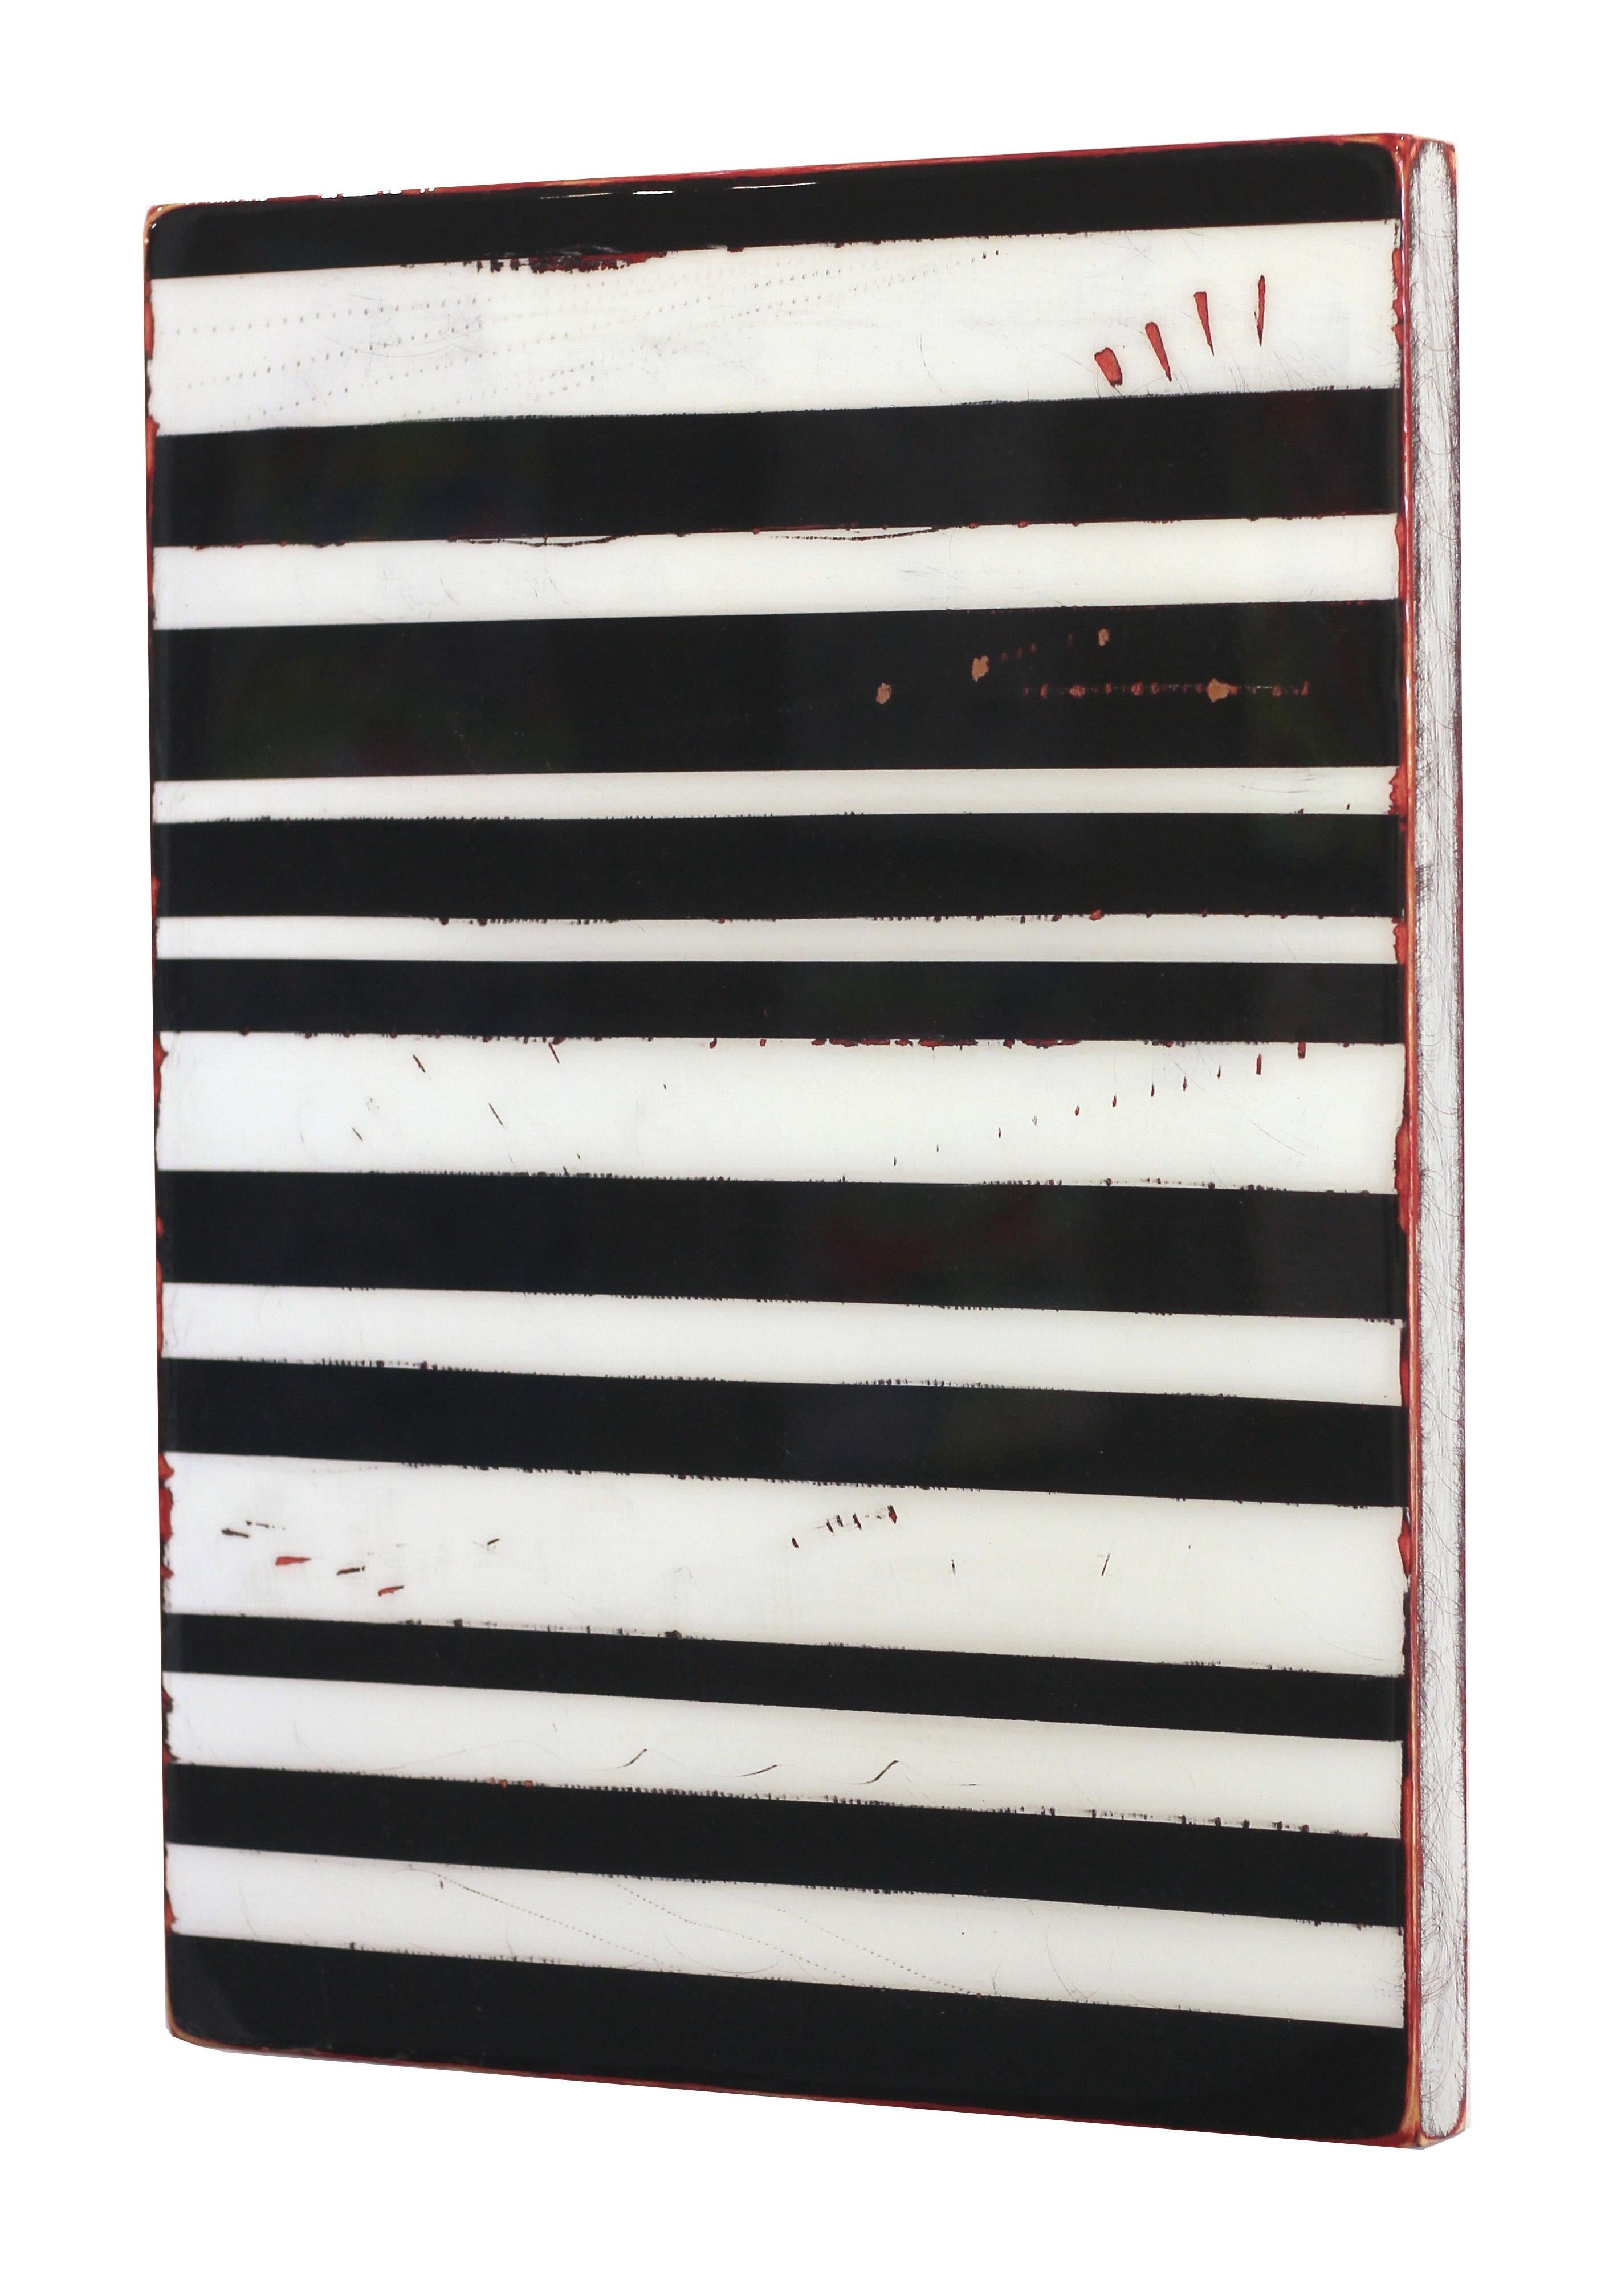 Ricky Hunt’s mixed media minimalism work is influenced by his tumultuous past that led to a paradigm shift in creativity and life. He covers the wood panel with layers of acrylic paint, removing some layers in the process to reveal the underlying